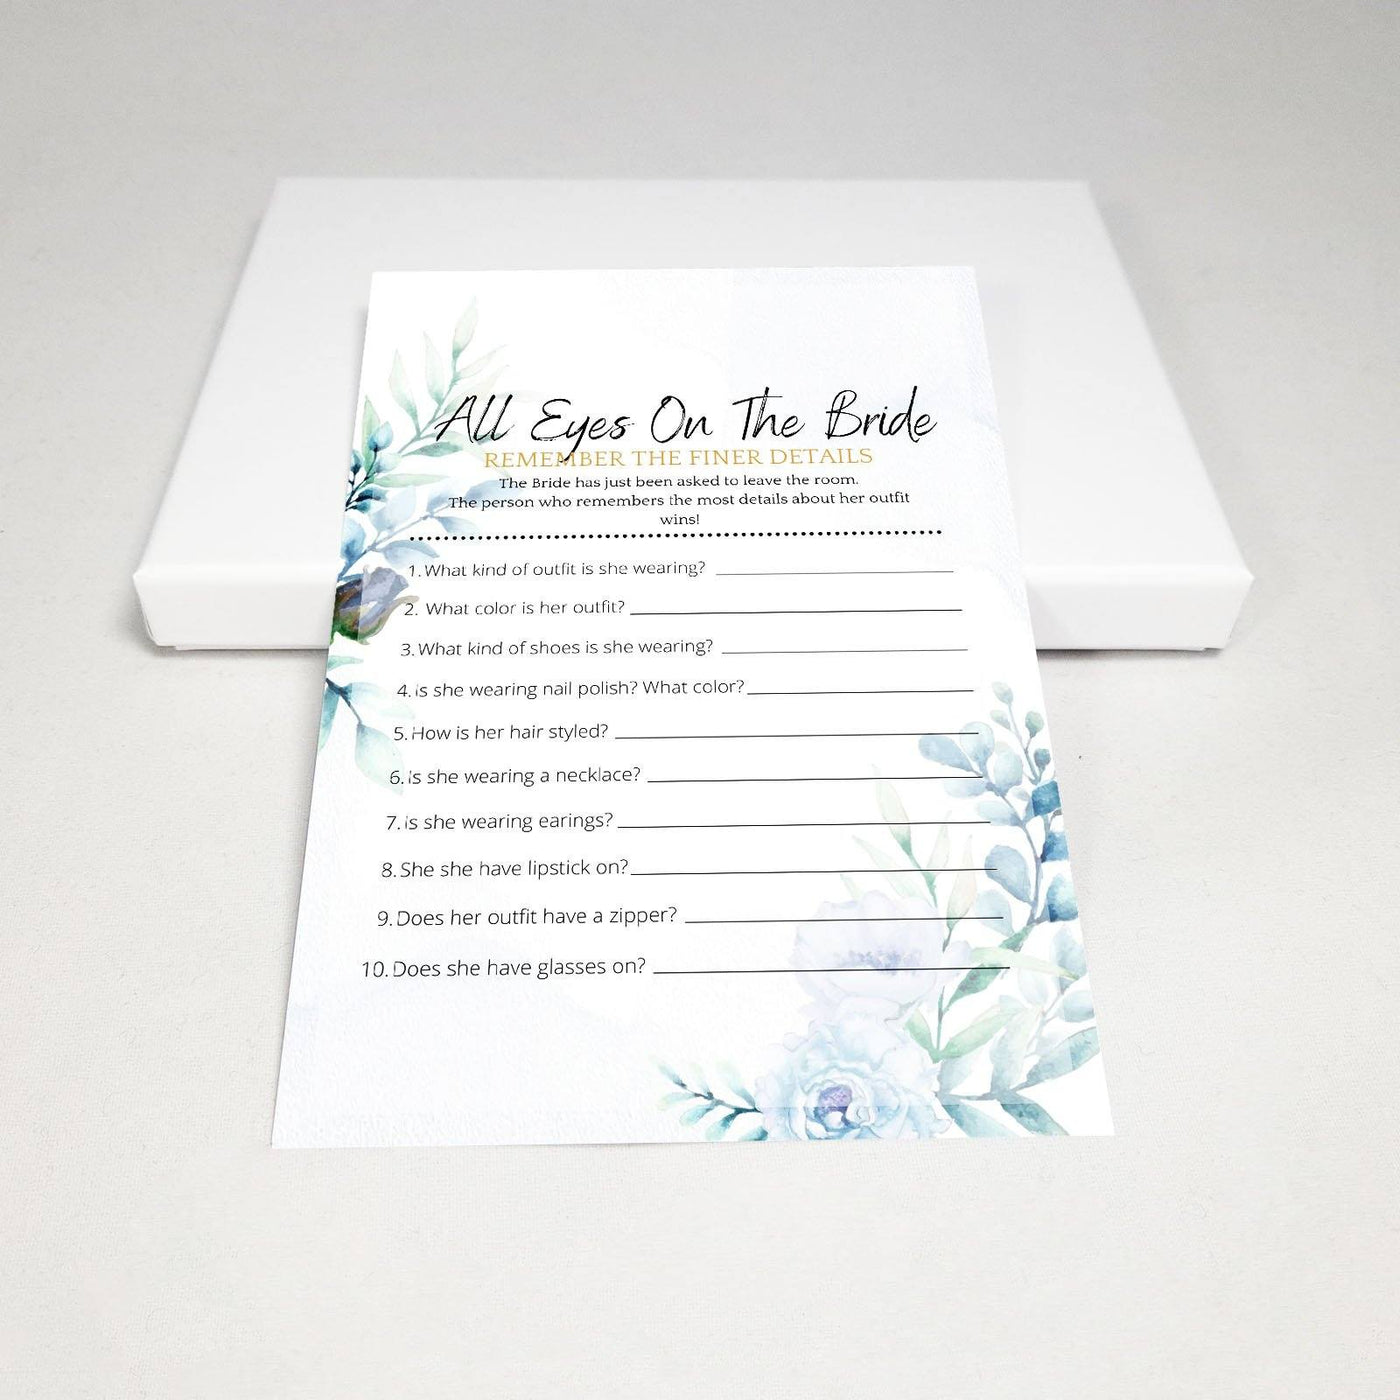 Watercolor Meadow - All Eyes On The Bride | Bridal Shower Game Party Games Your Party Games 